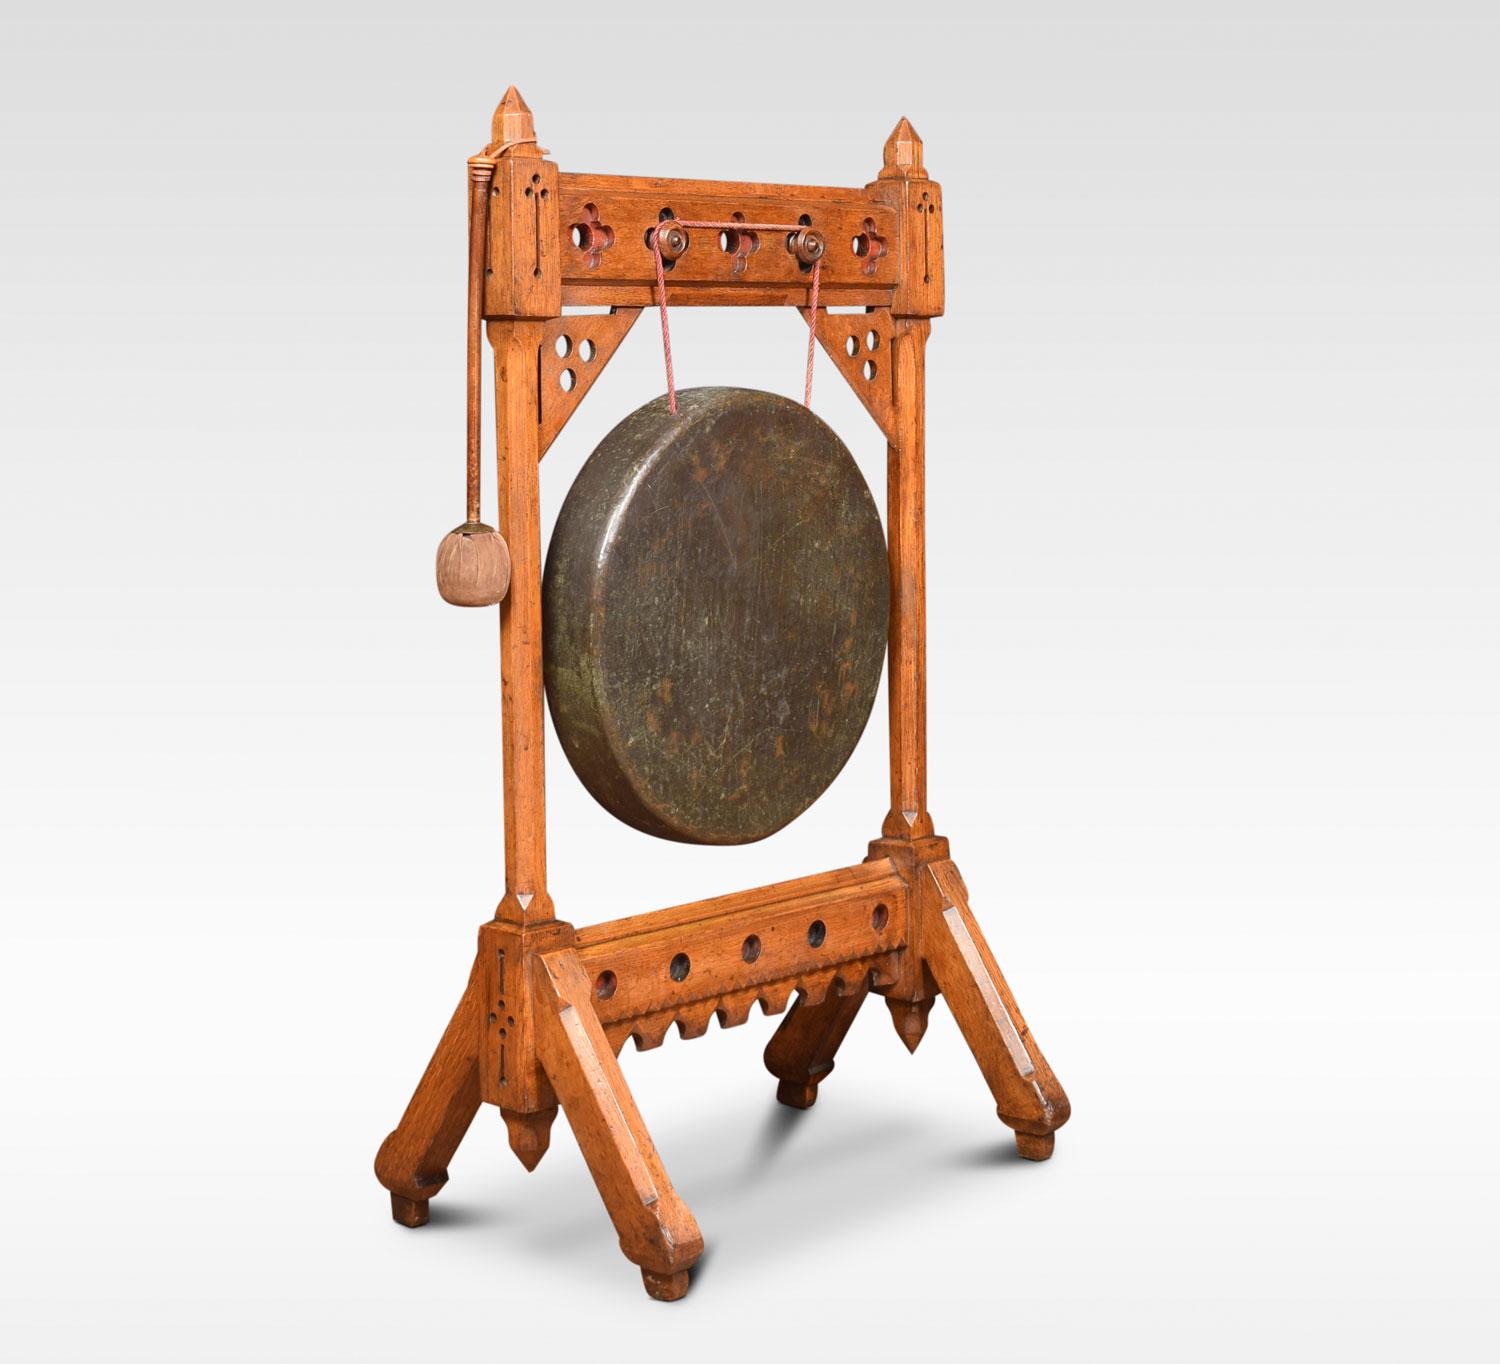 Mid-Victorian gothic revival dinner gong, in the style of Bruce Talbert. With oak frame, brass gong and original beater.
Dimensions
Height 42 inches
Width 24 inches
Depth 15.5 inches.